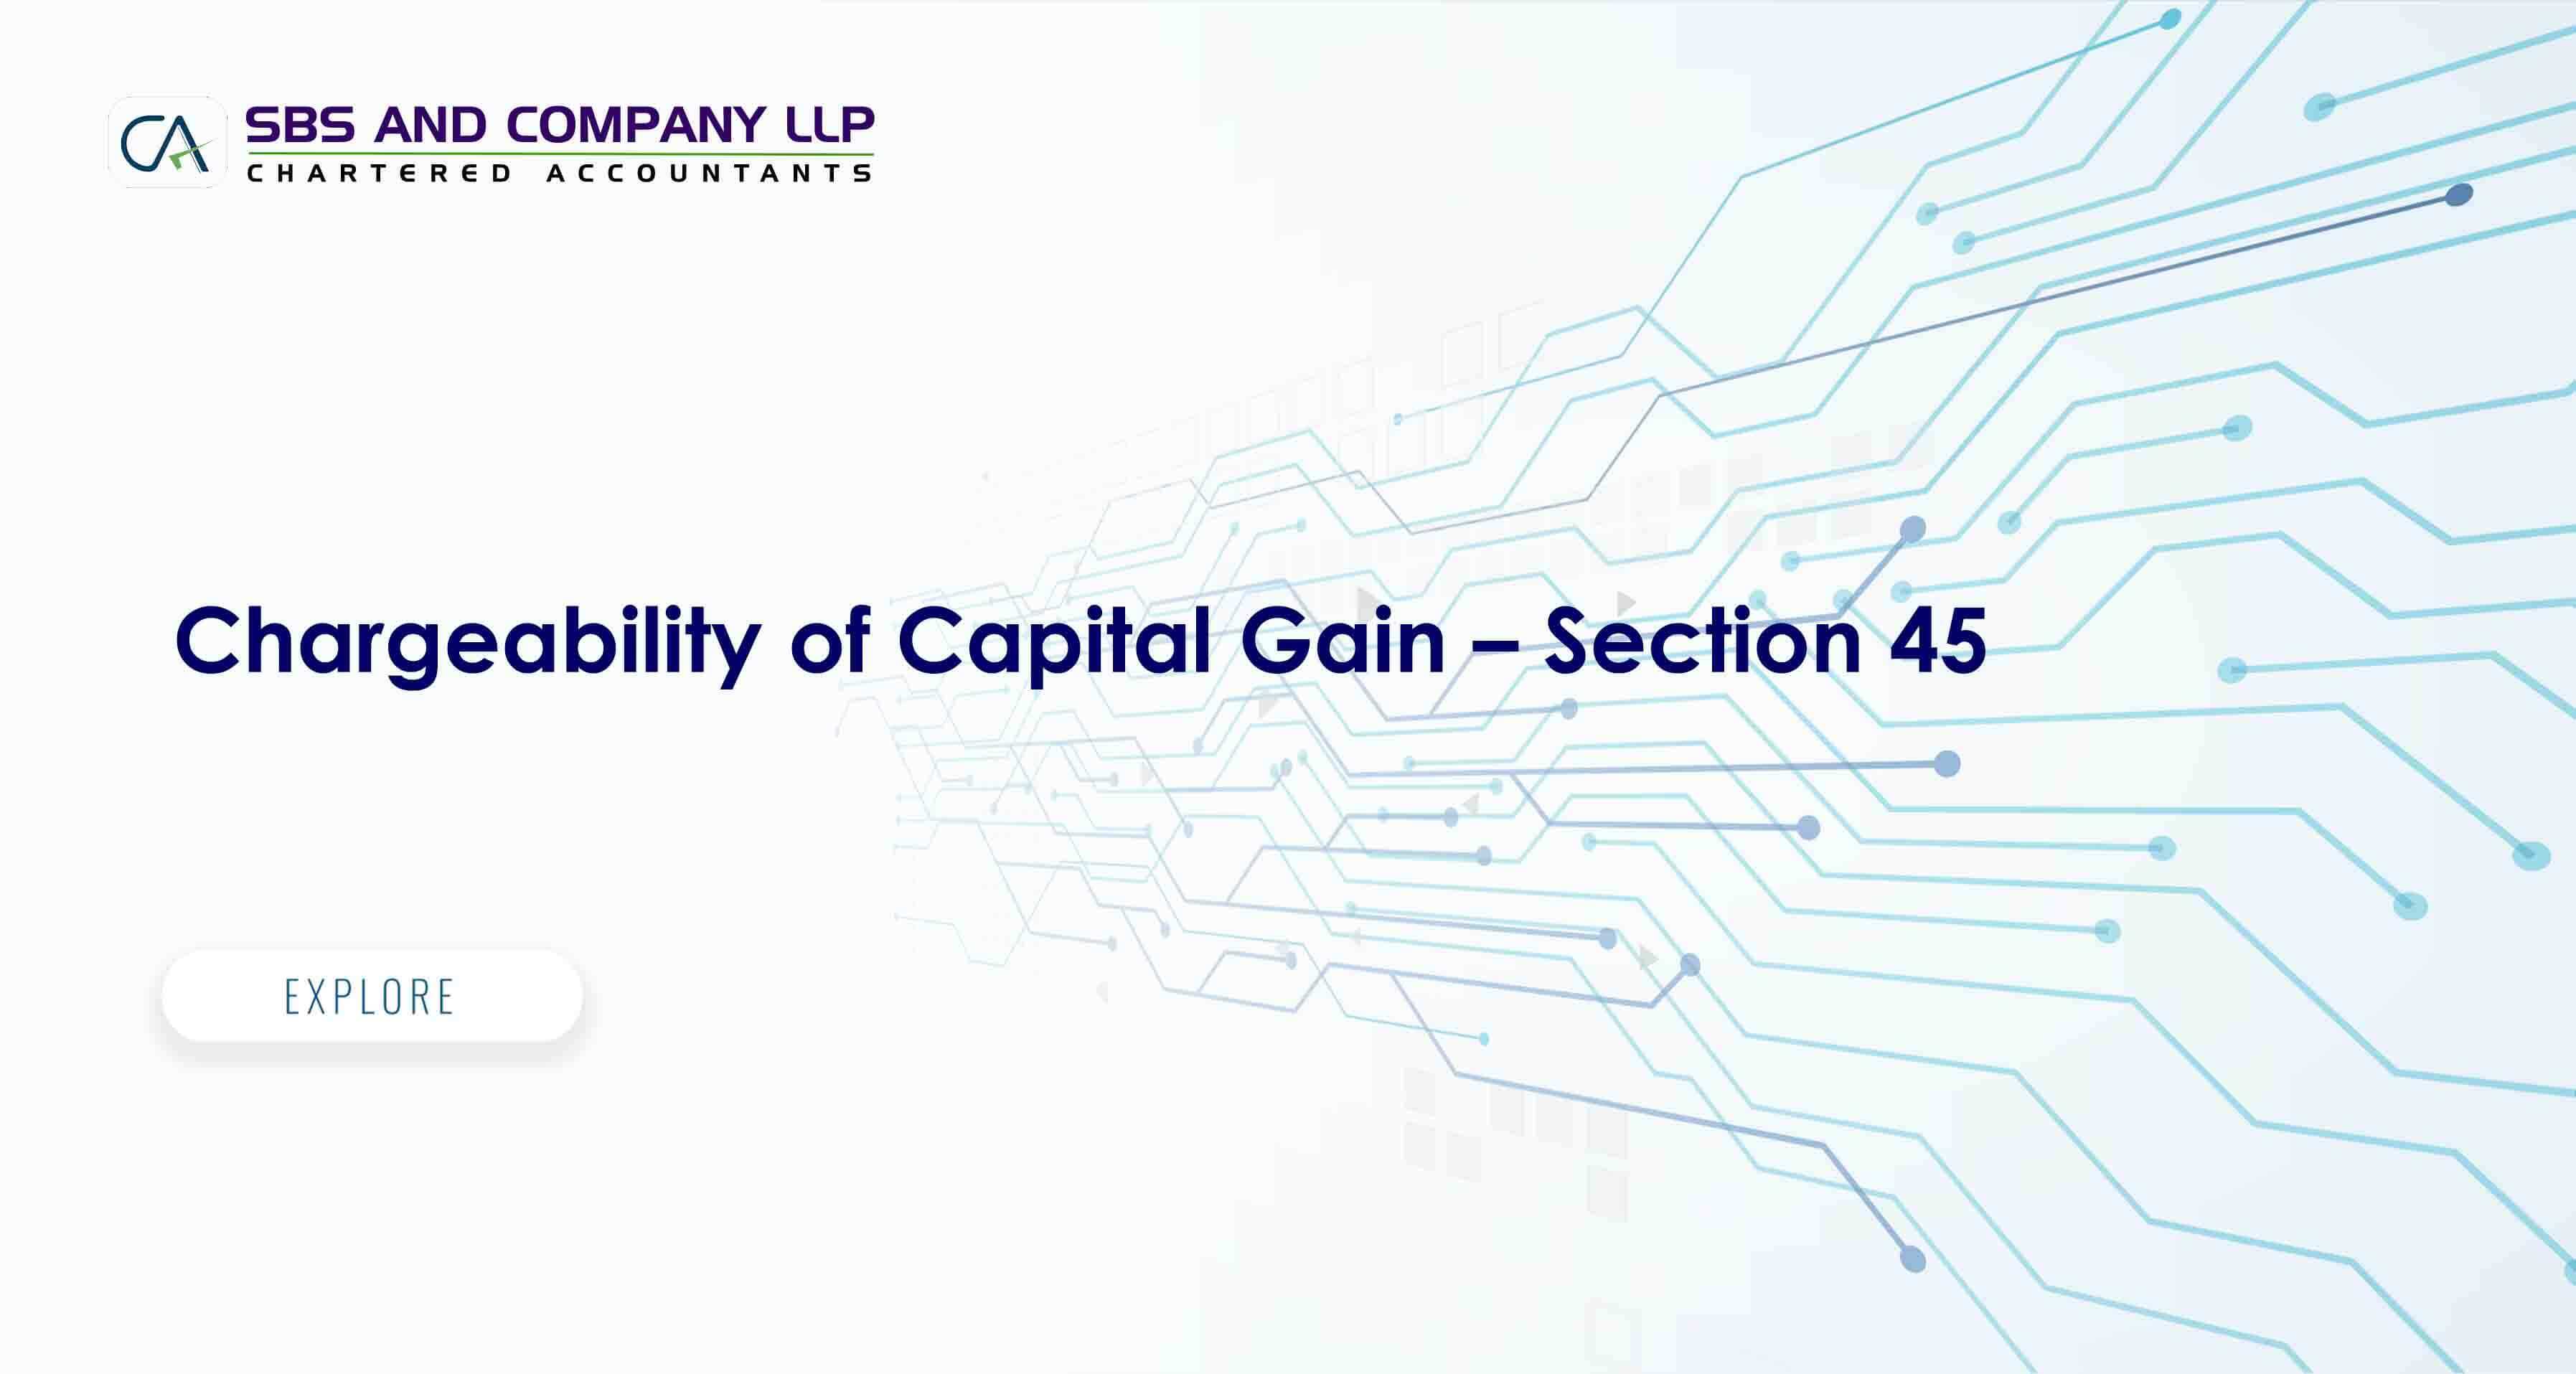 Chargeability of Capital Gain – Section 45